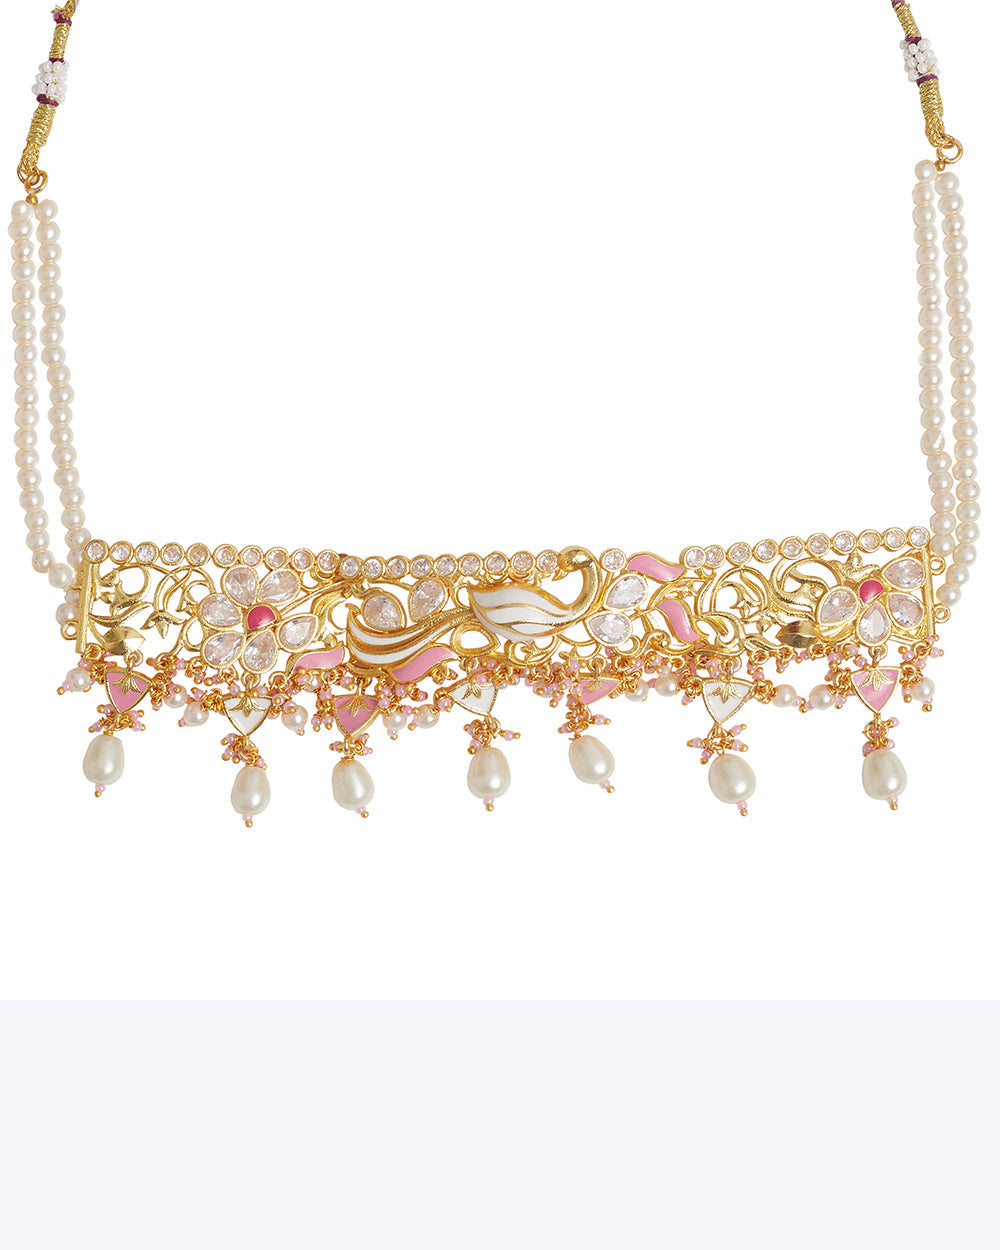 Women's Traditional Necklace With Pearls And Lotus Design - Voylla